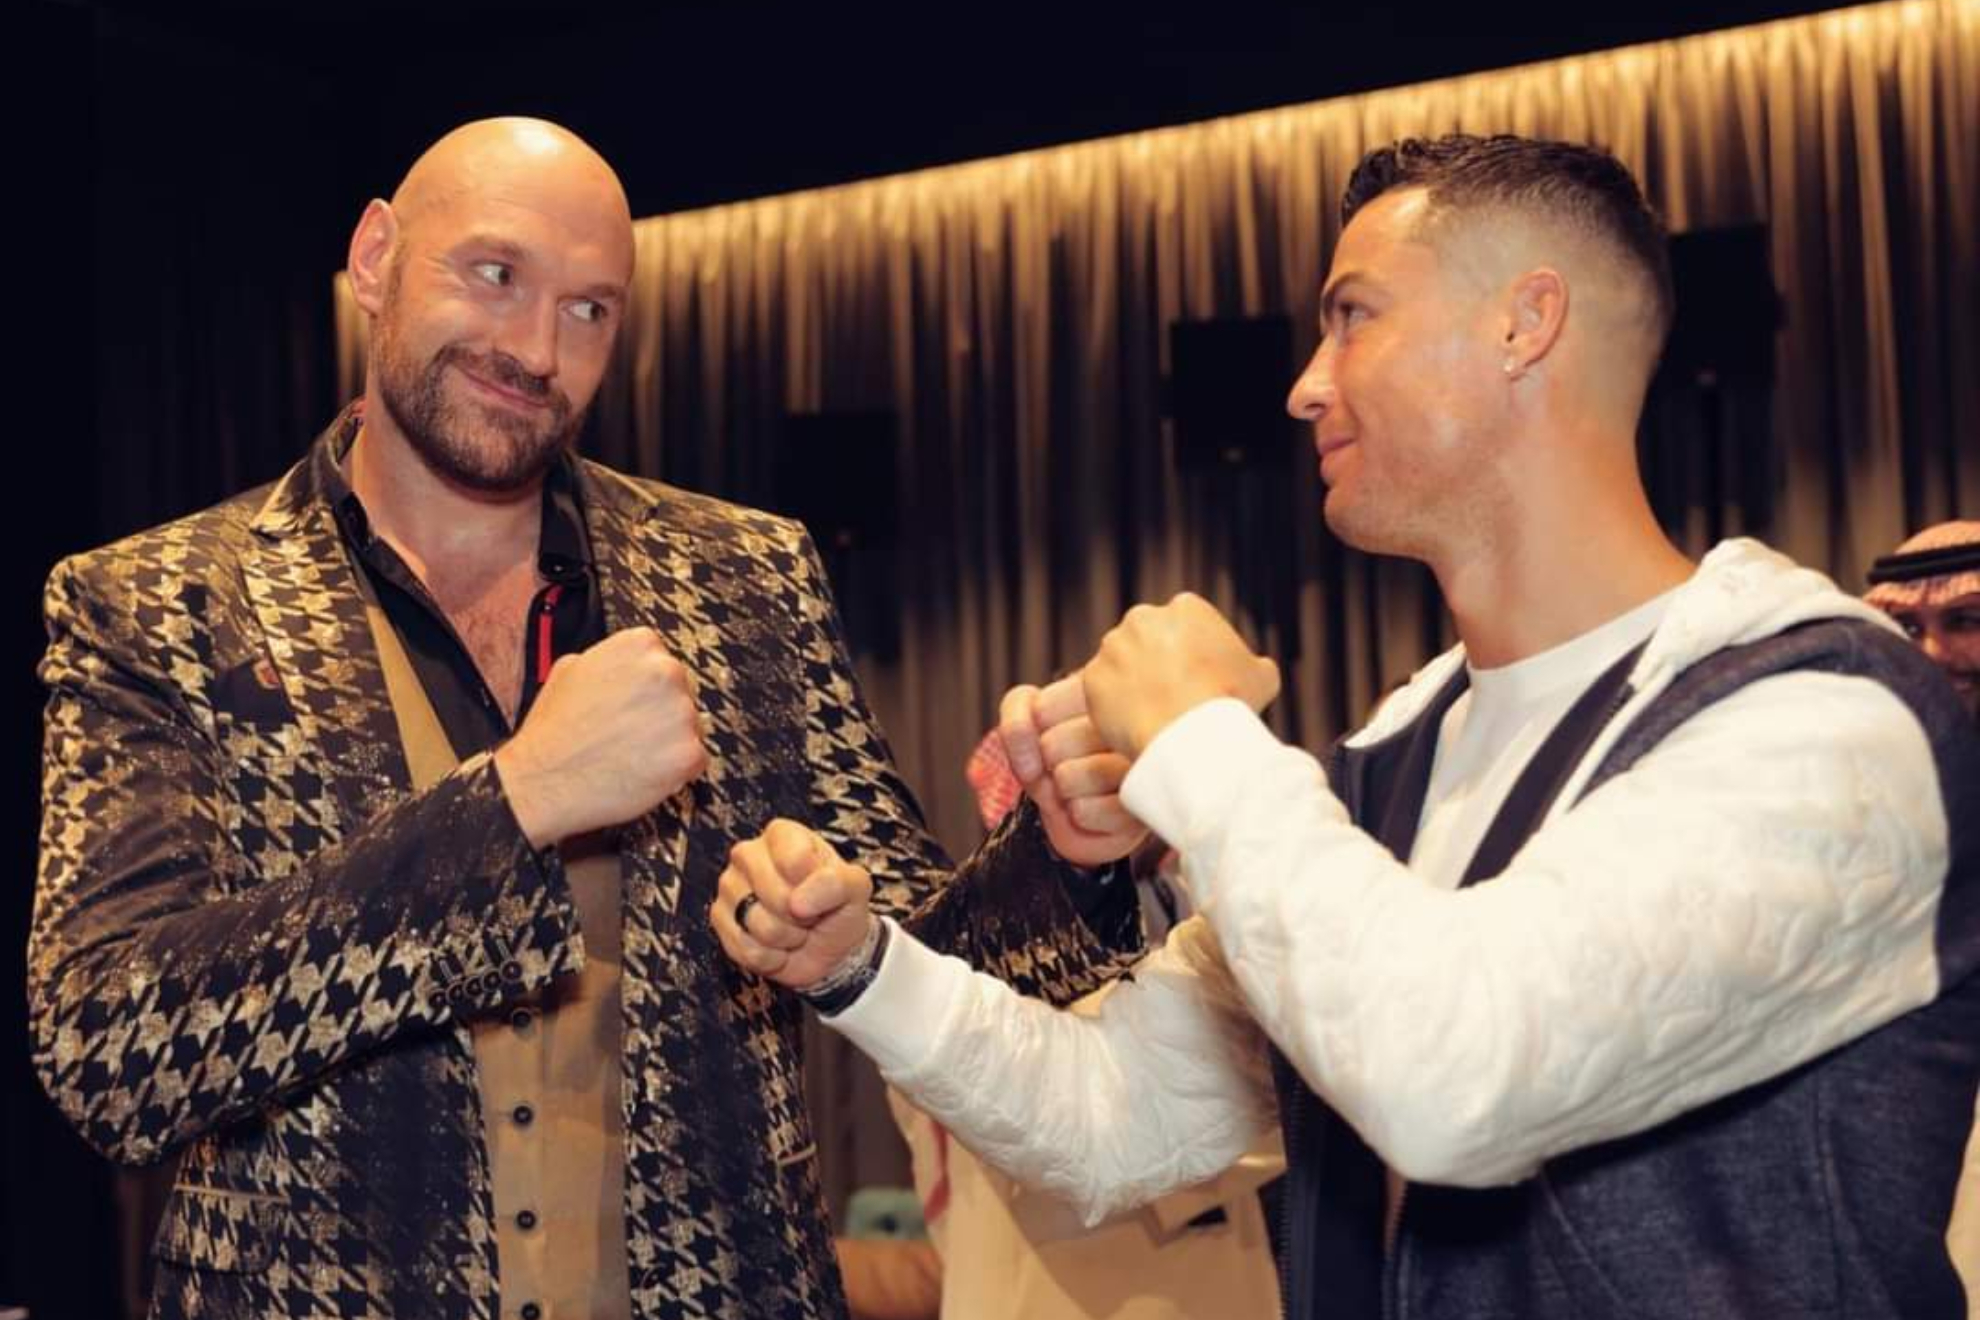 Tyson Fury gets voted as the sexiest athlete in the world leaving Cristiano Ronaldo in 5th place